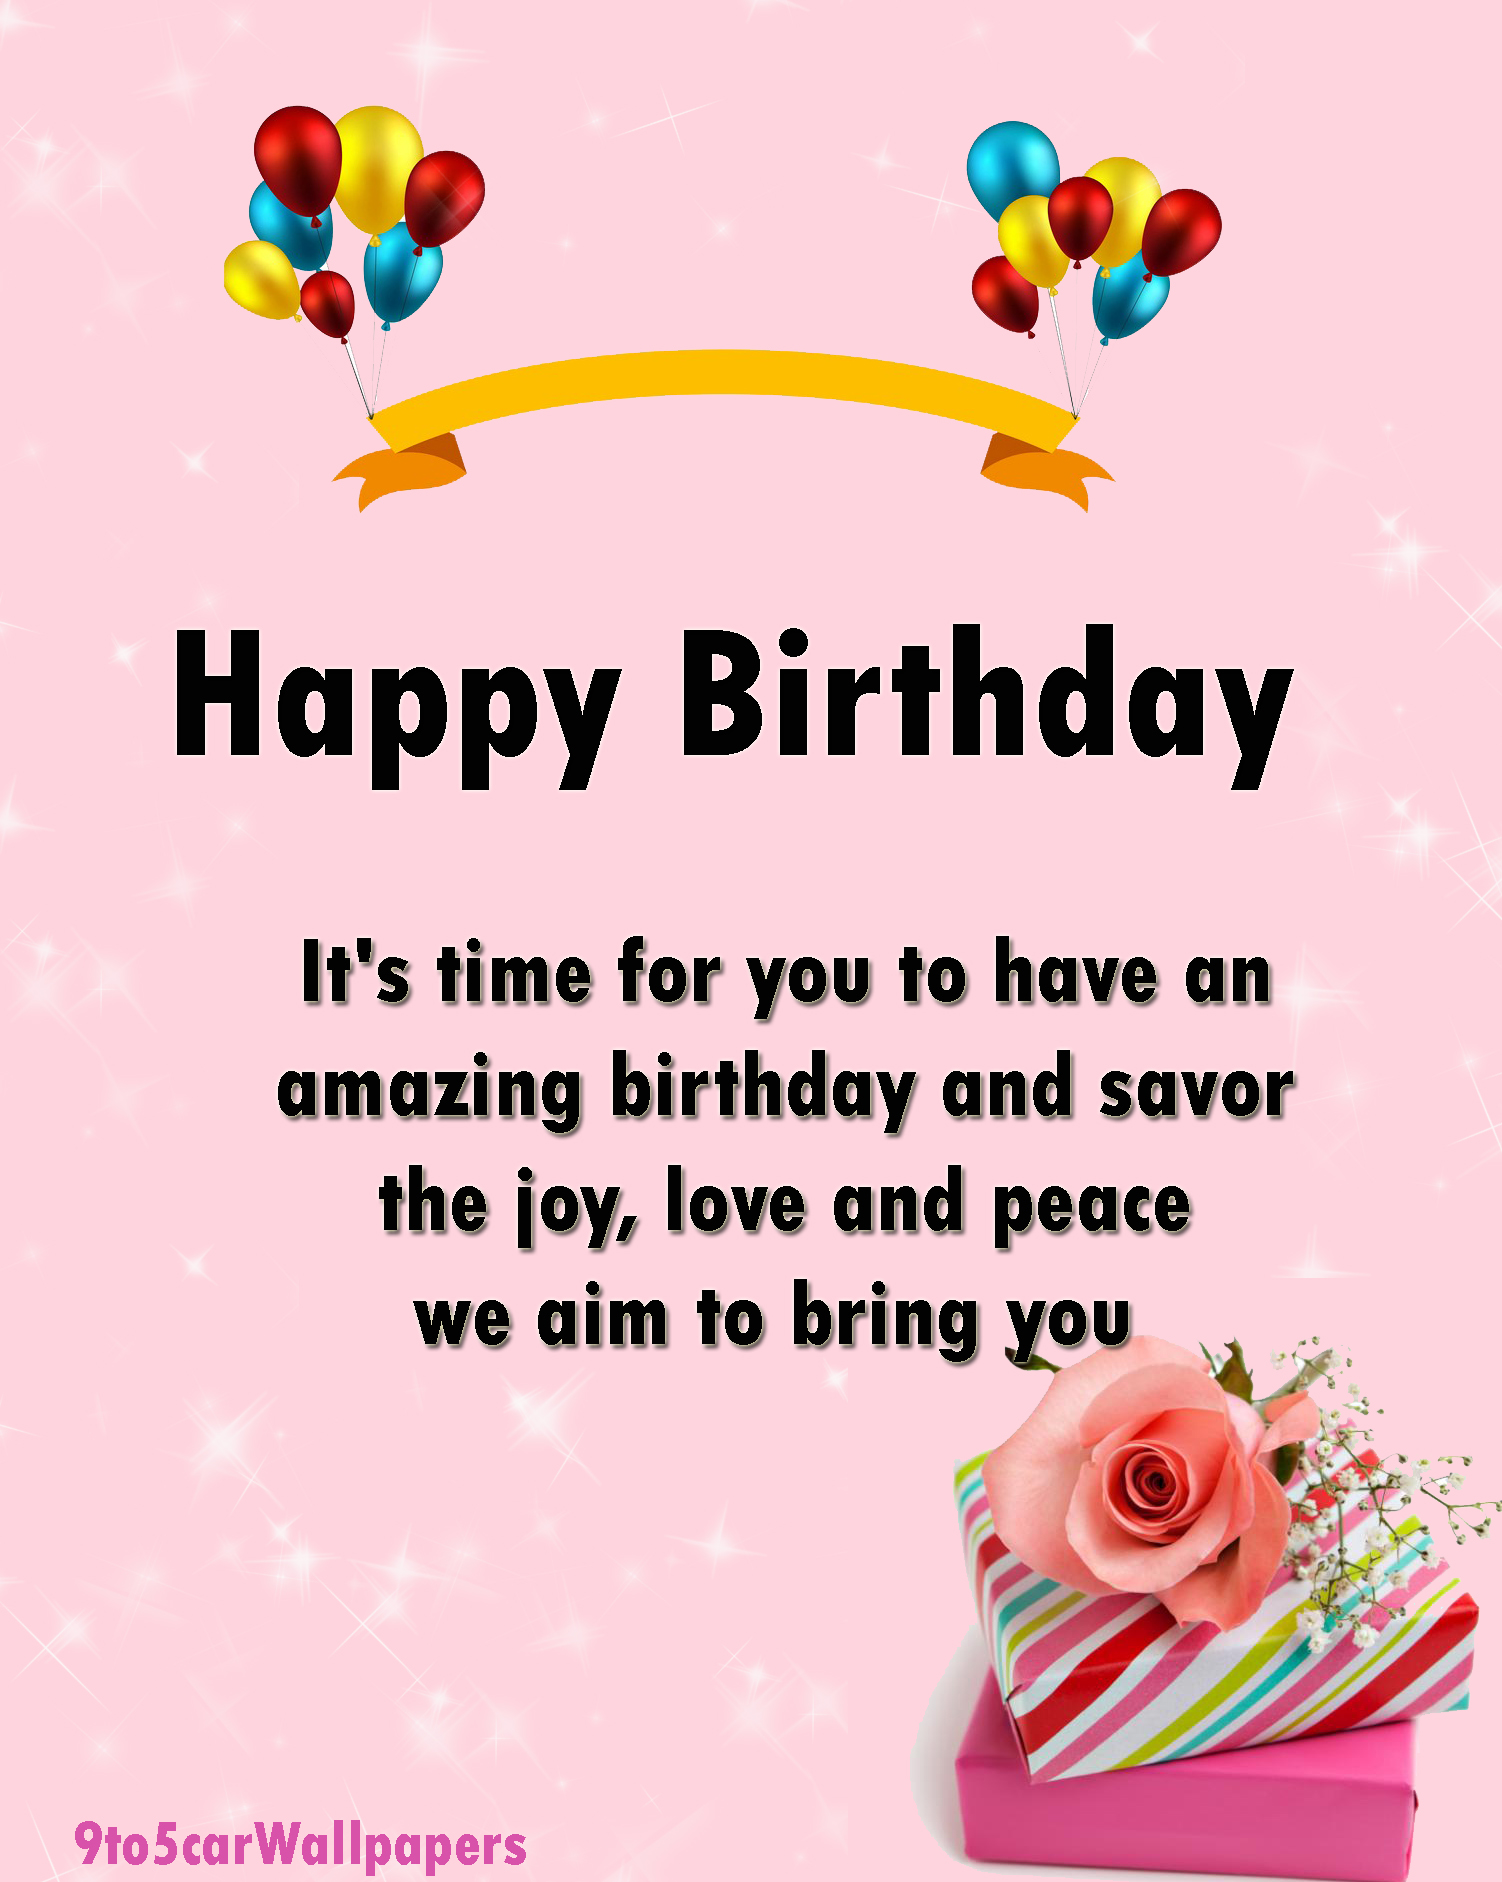 Best Happy Birthday HD Images 2018 - 9to5 Car Wallpapers downloads